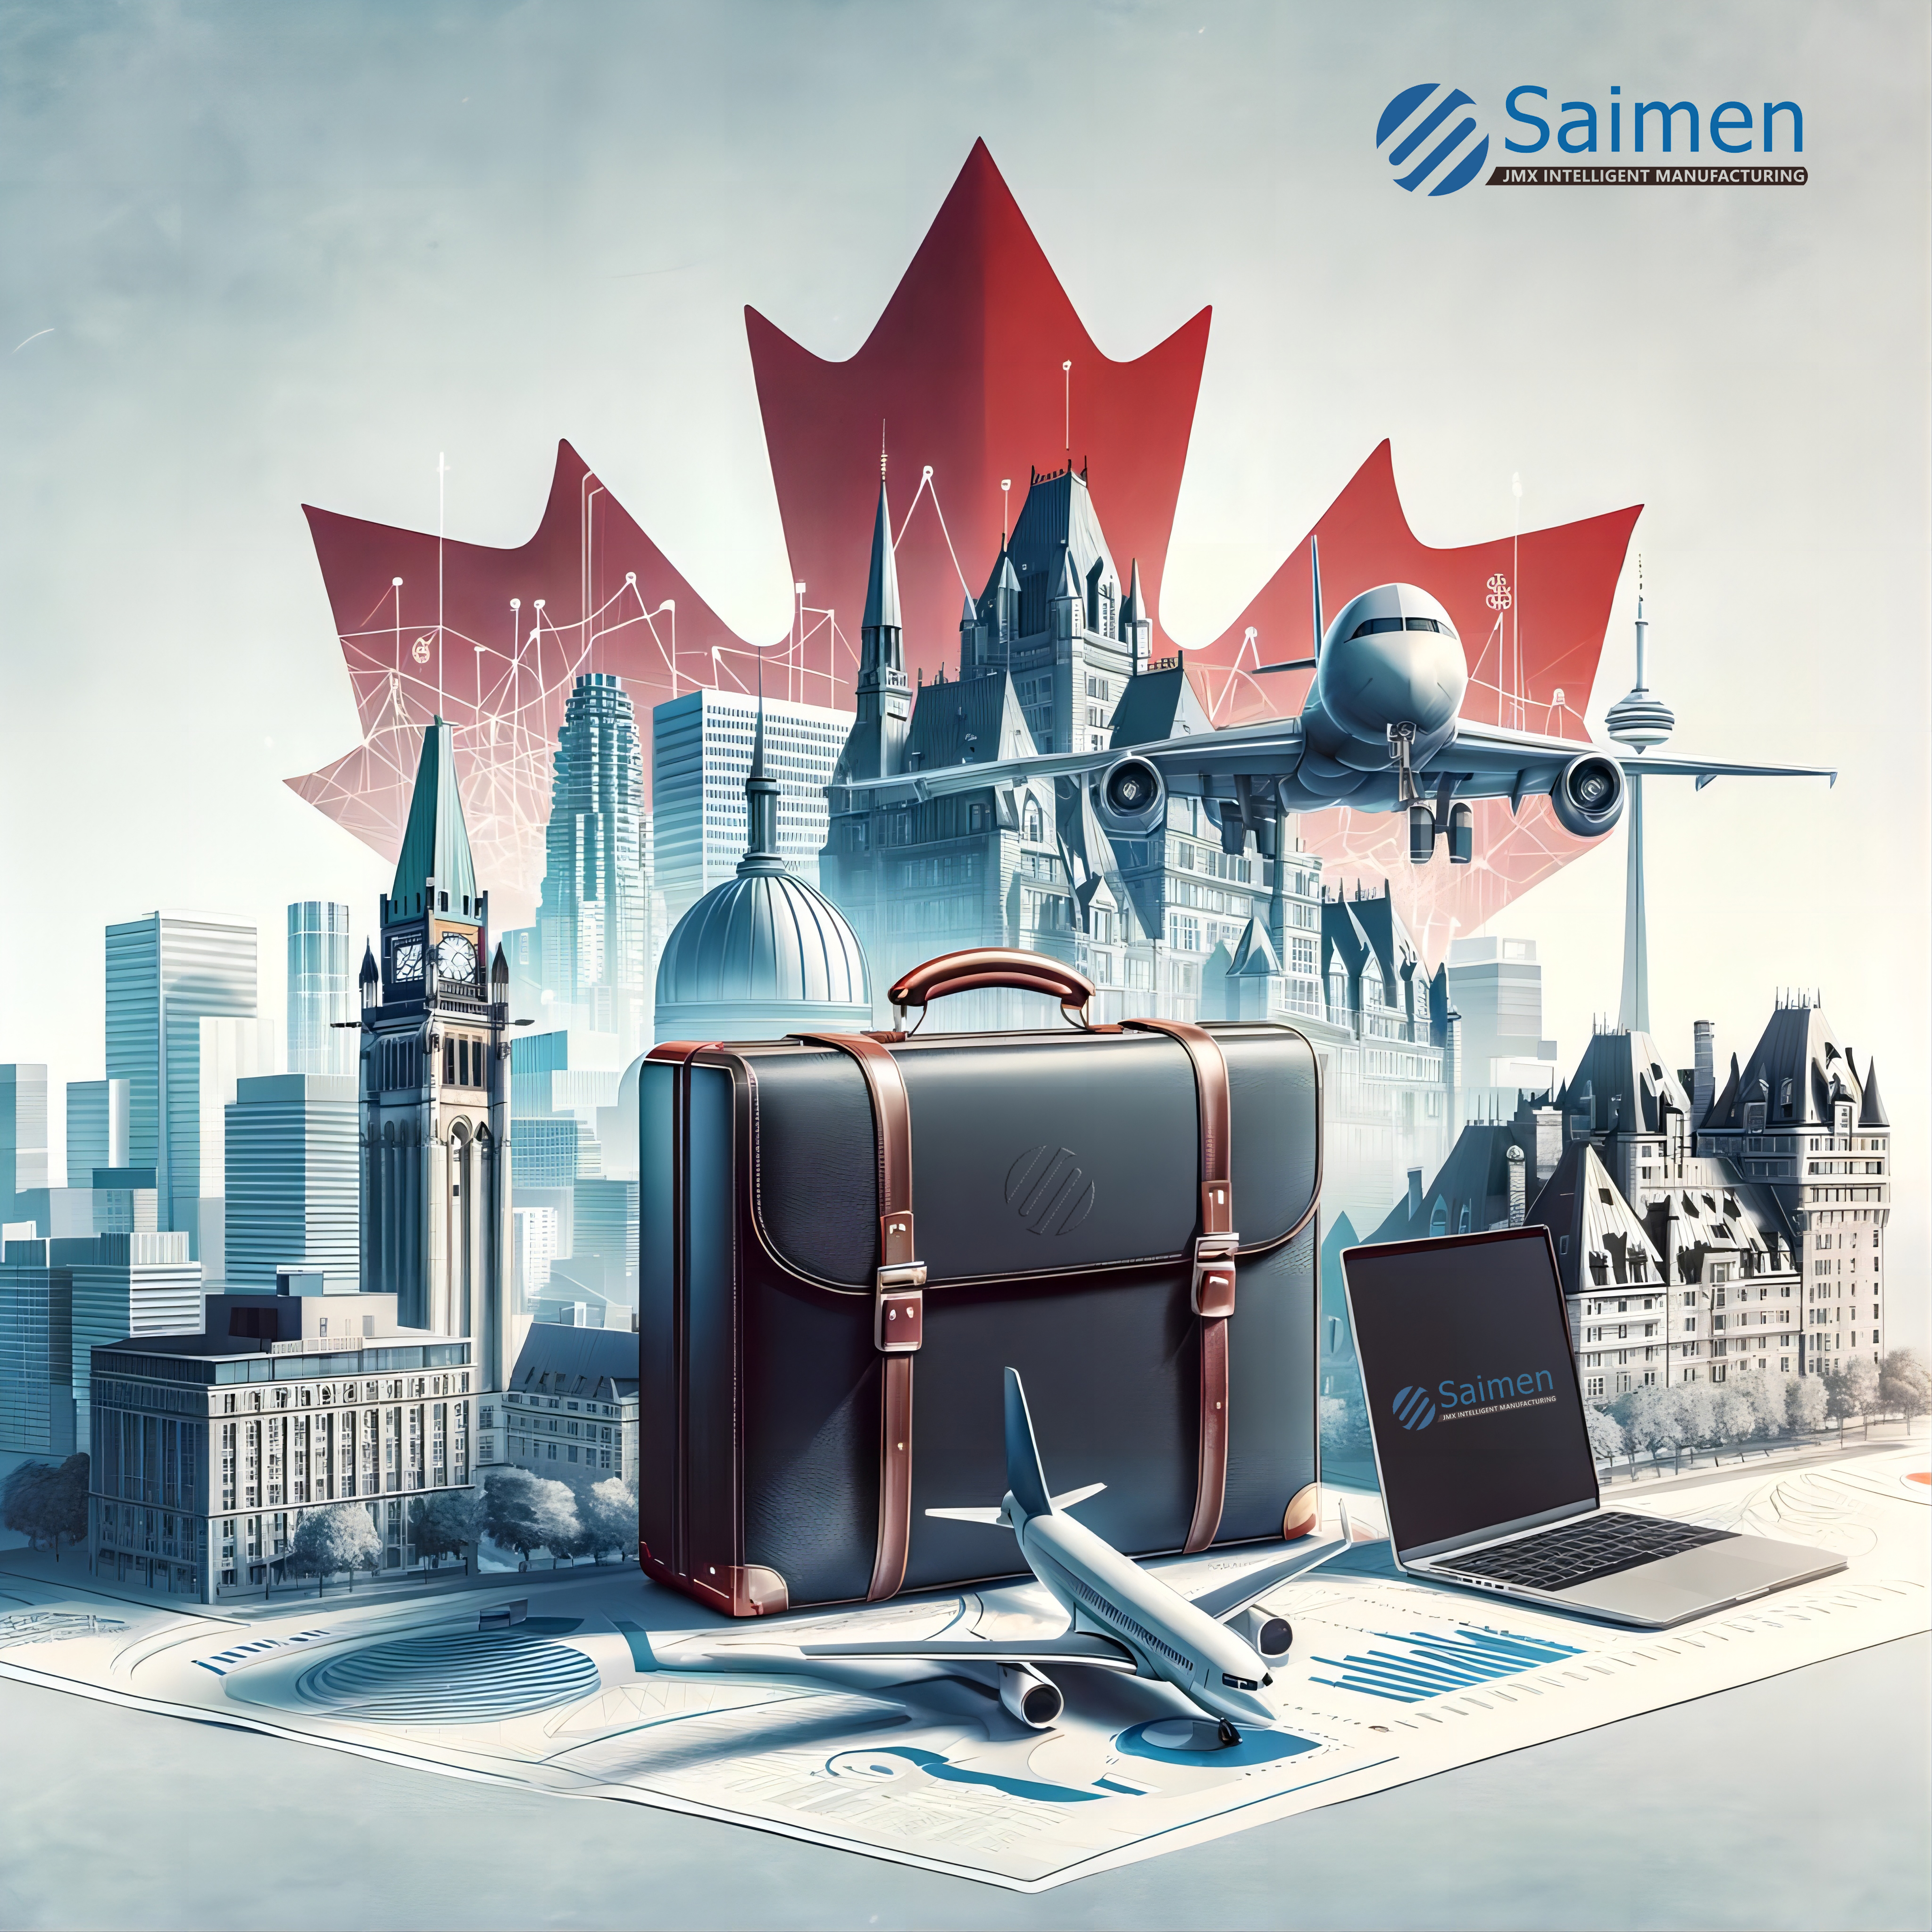 Digital illustration of Saimen’s global business expansion, featuring iconic Canadian landmarks, an airplane, and a briefcase, symbolizing international travel and trade